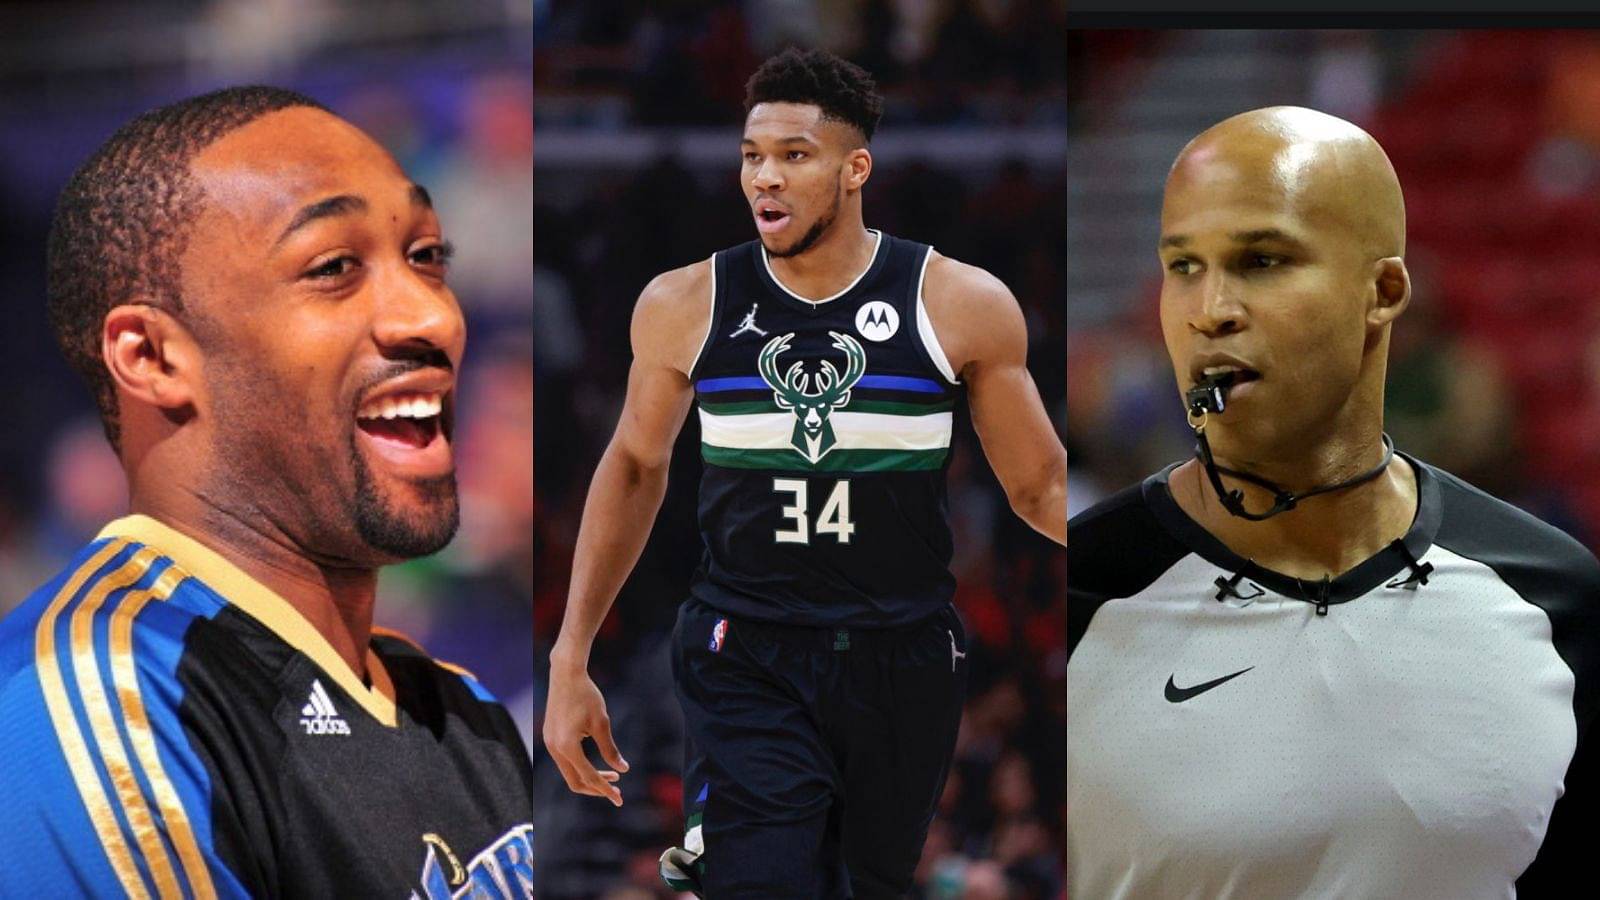 “Giannis Antetokounmpo is the best two-way player, and it’s not even close!”: RJ shuts Gilbert Arenas down and hilariously calls him a ‘little di*k’